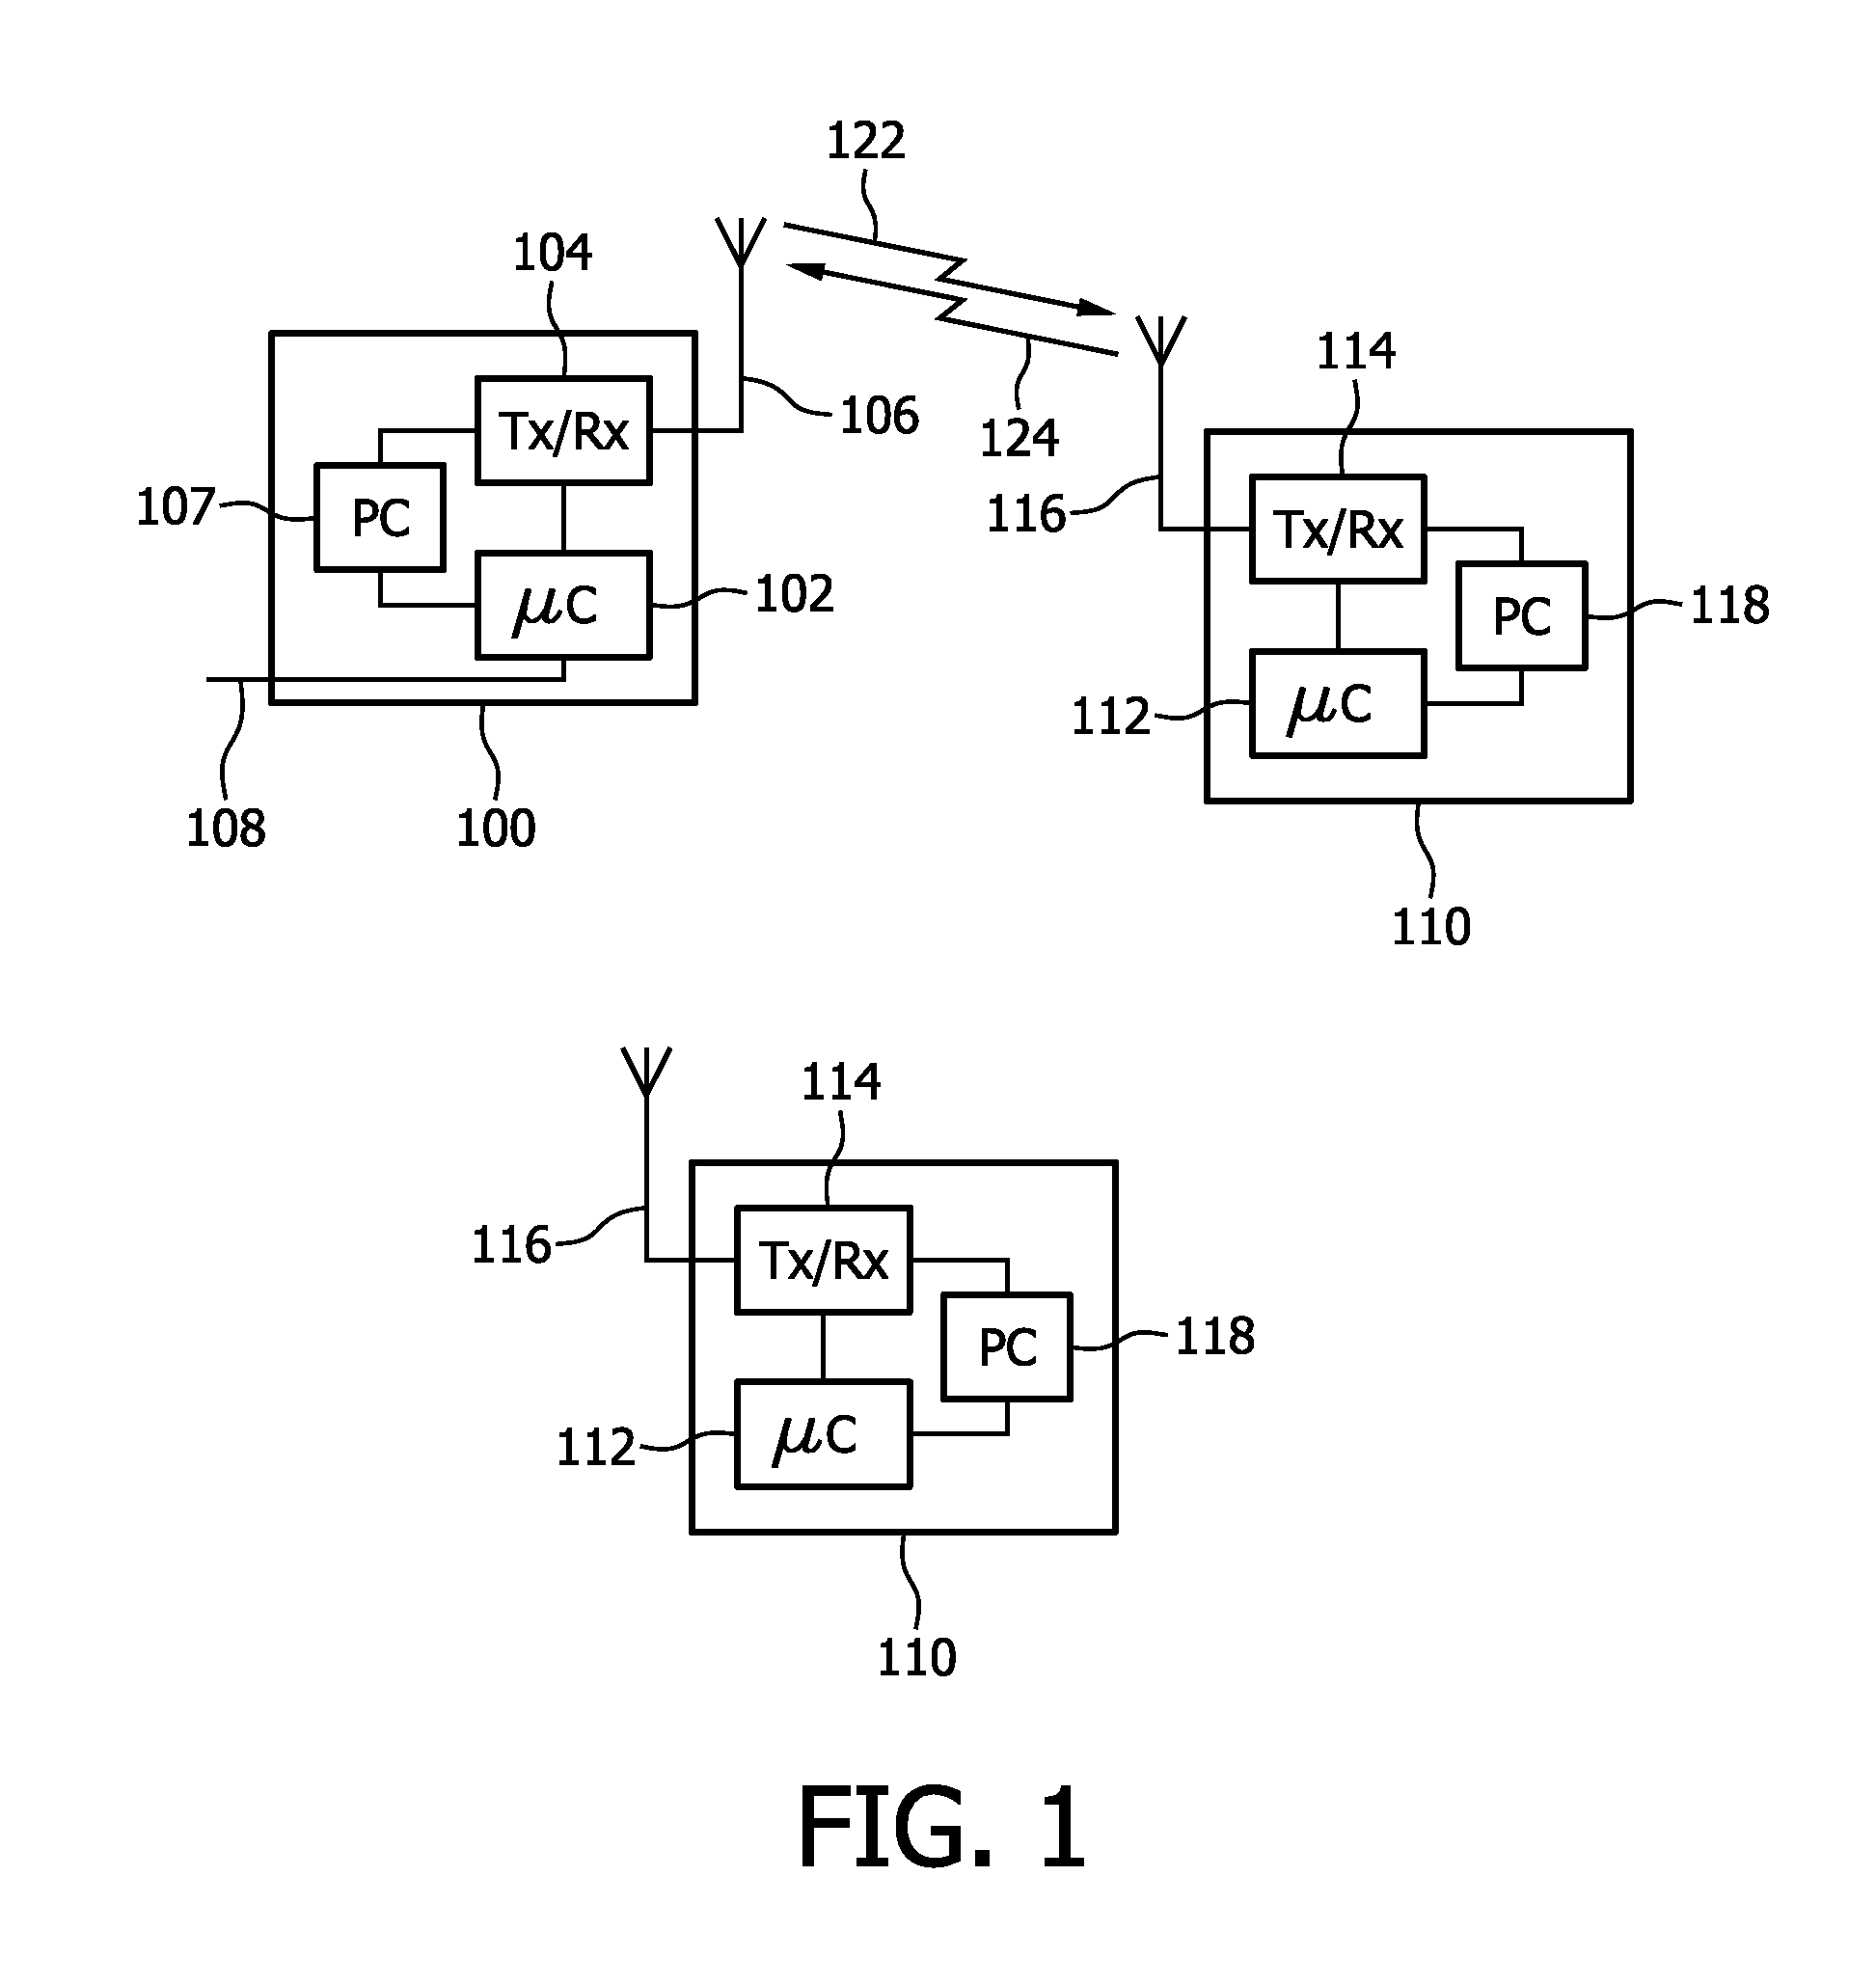 Method for communicating in a mobile network